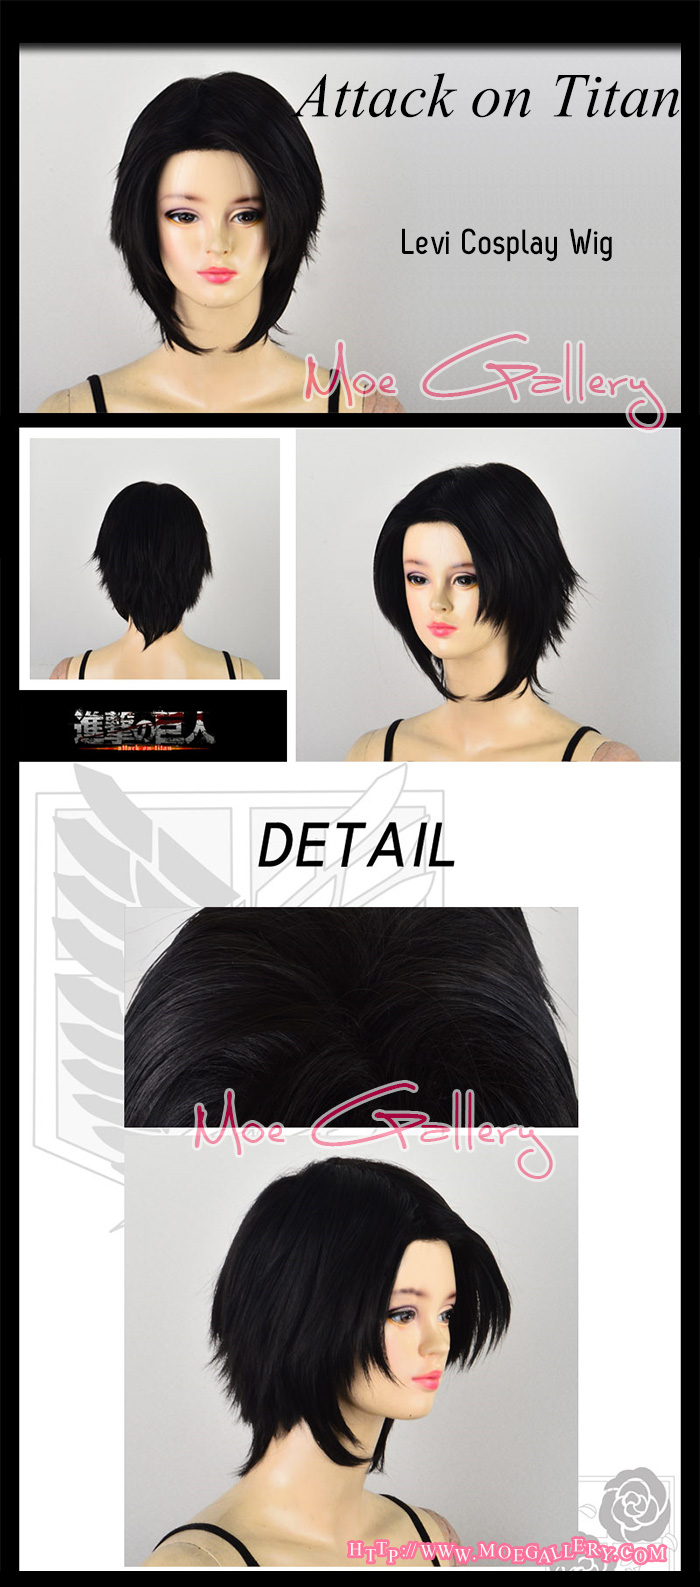 Attack on Titan Levi Cosplay Wig